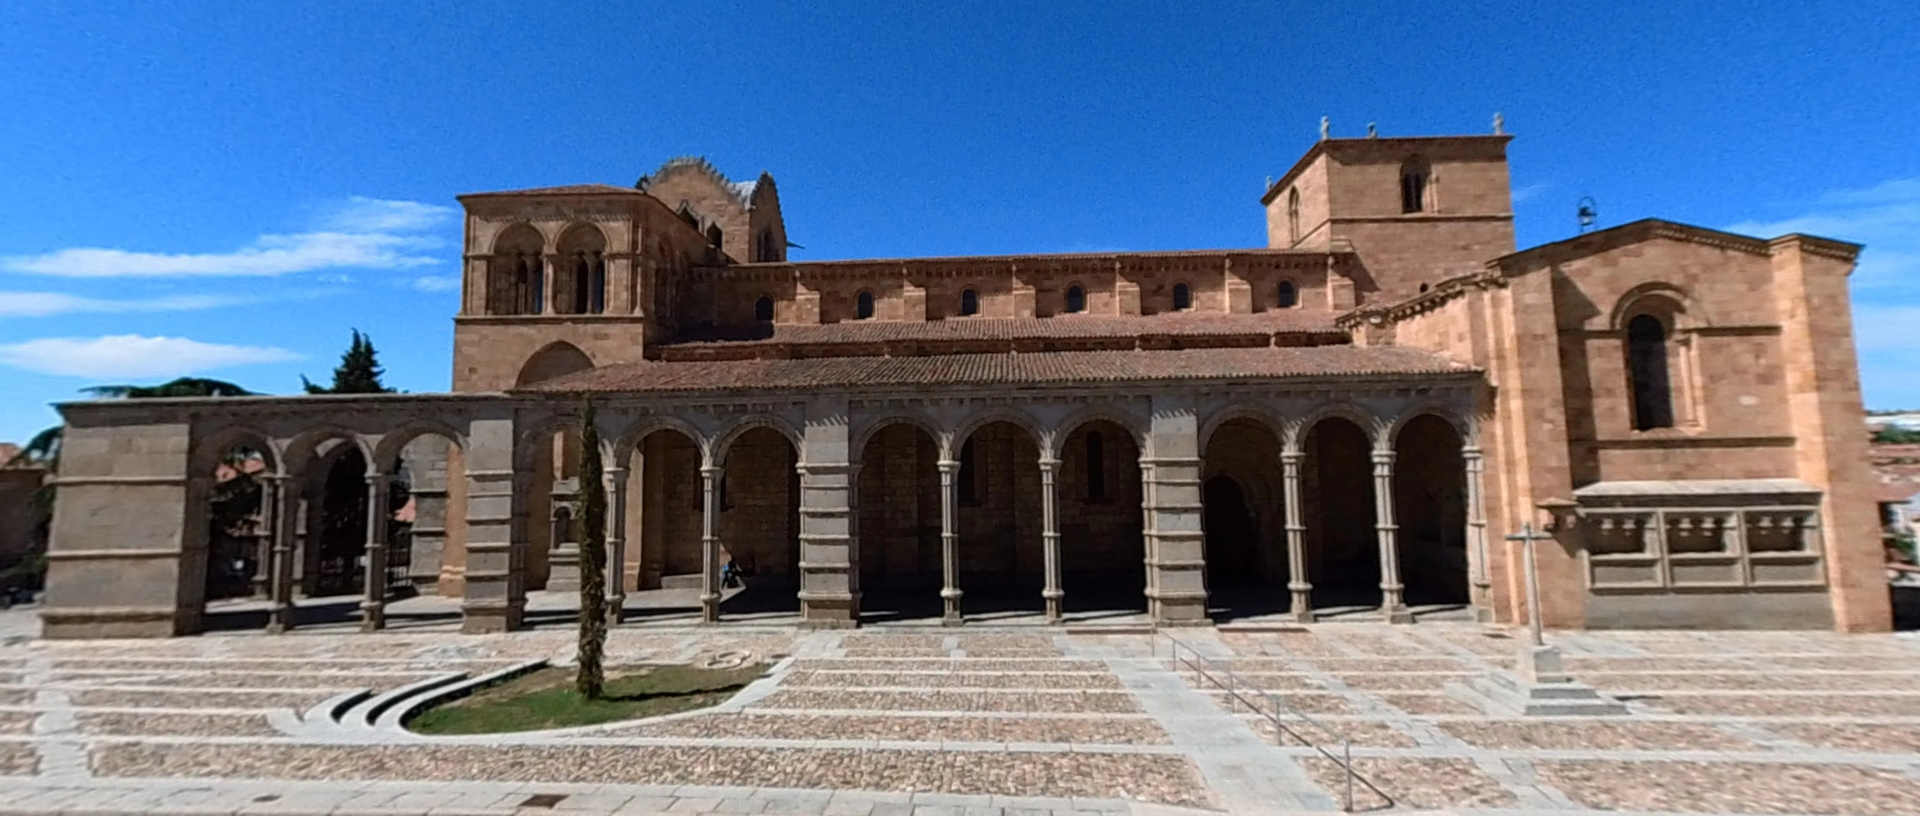 Basilica of San Vicente by Google Earth